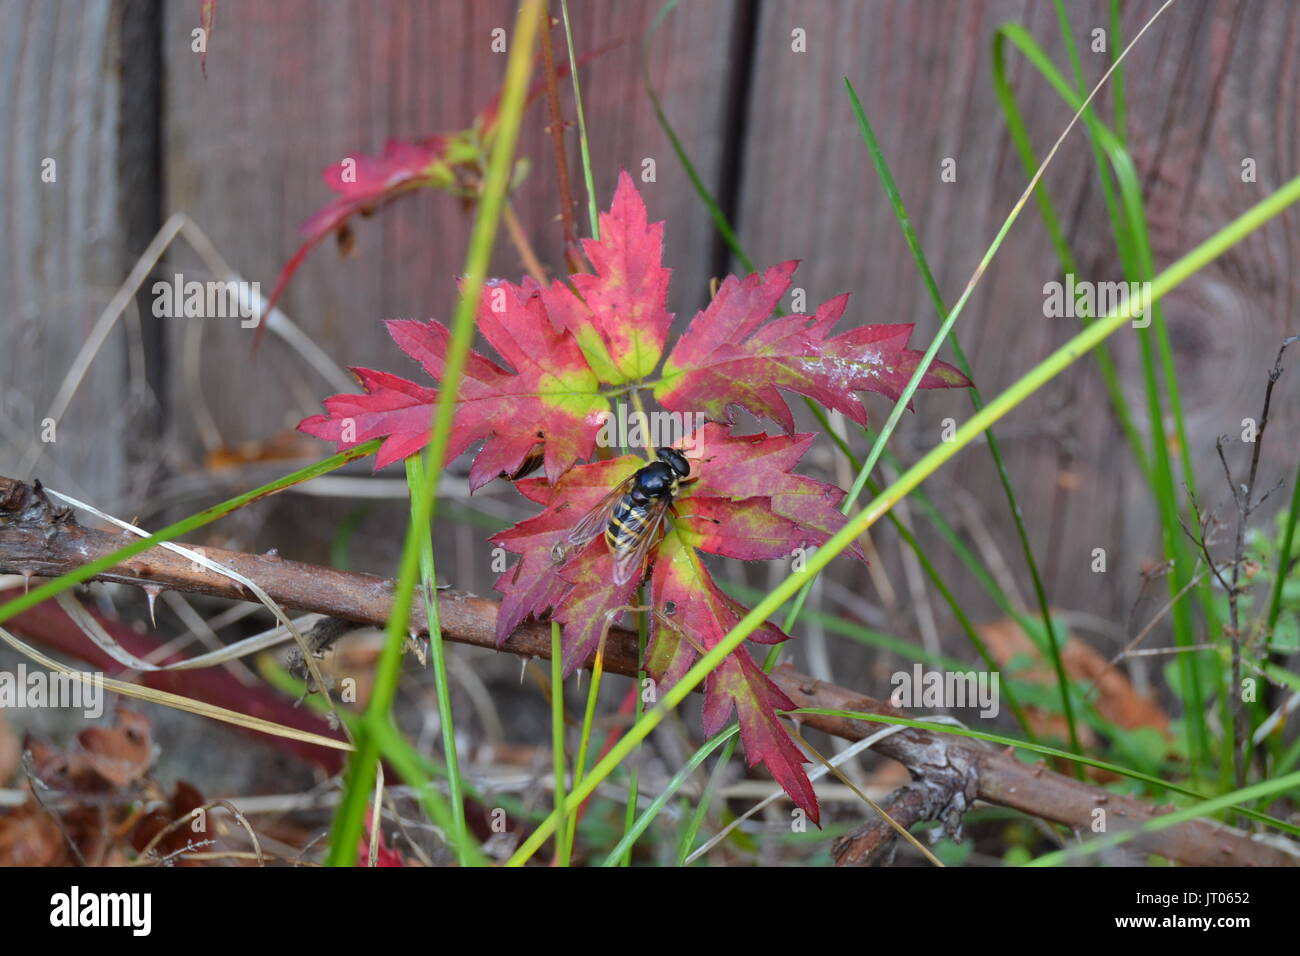 Hoverfly on leaf Stock Photo